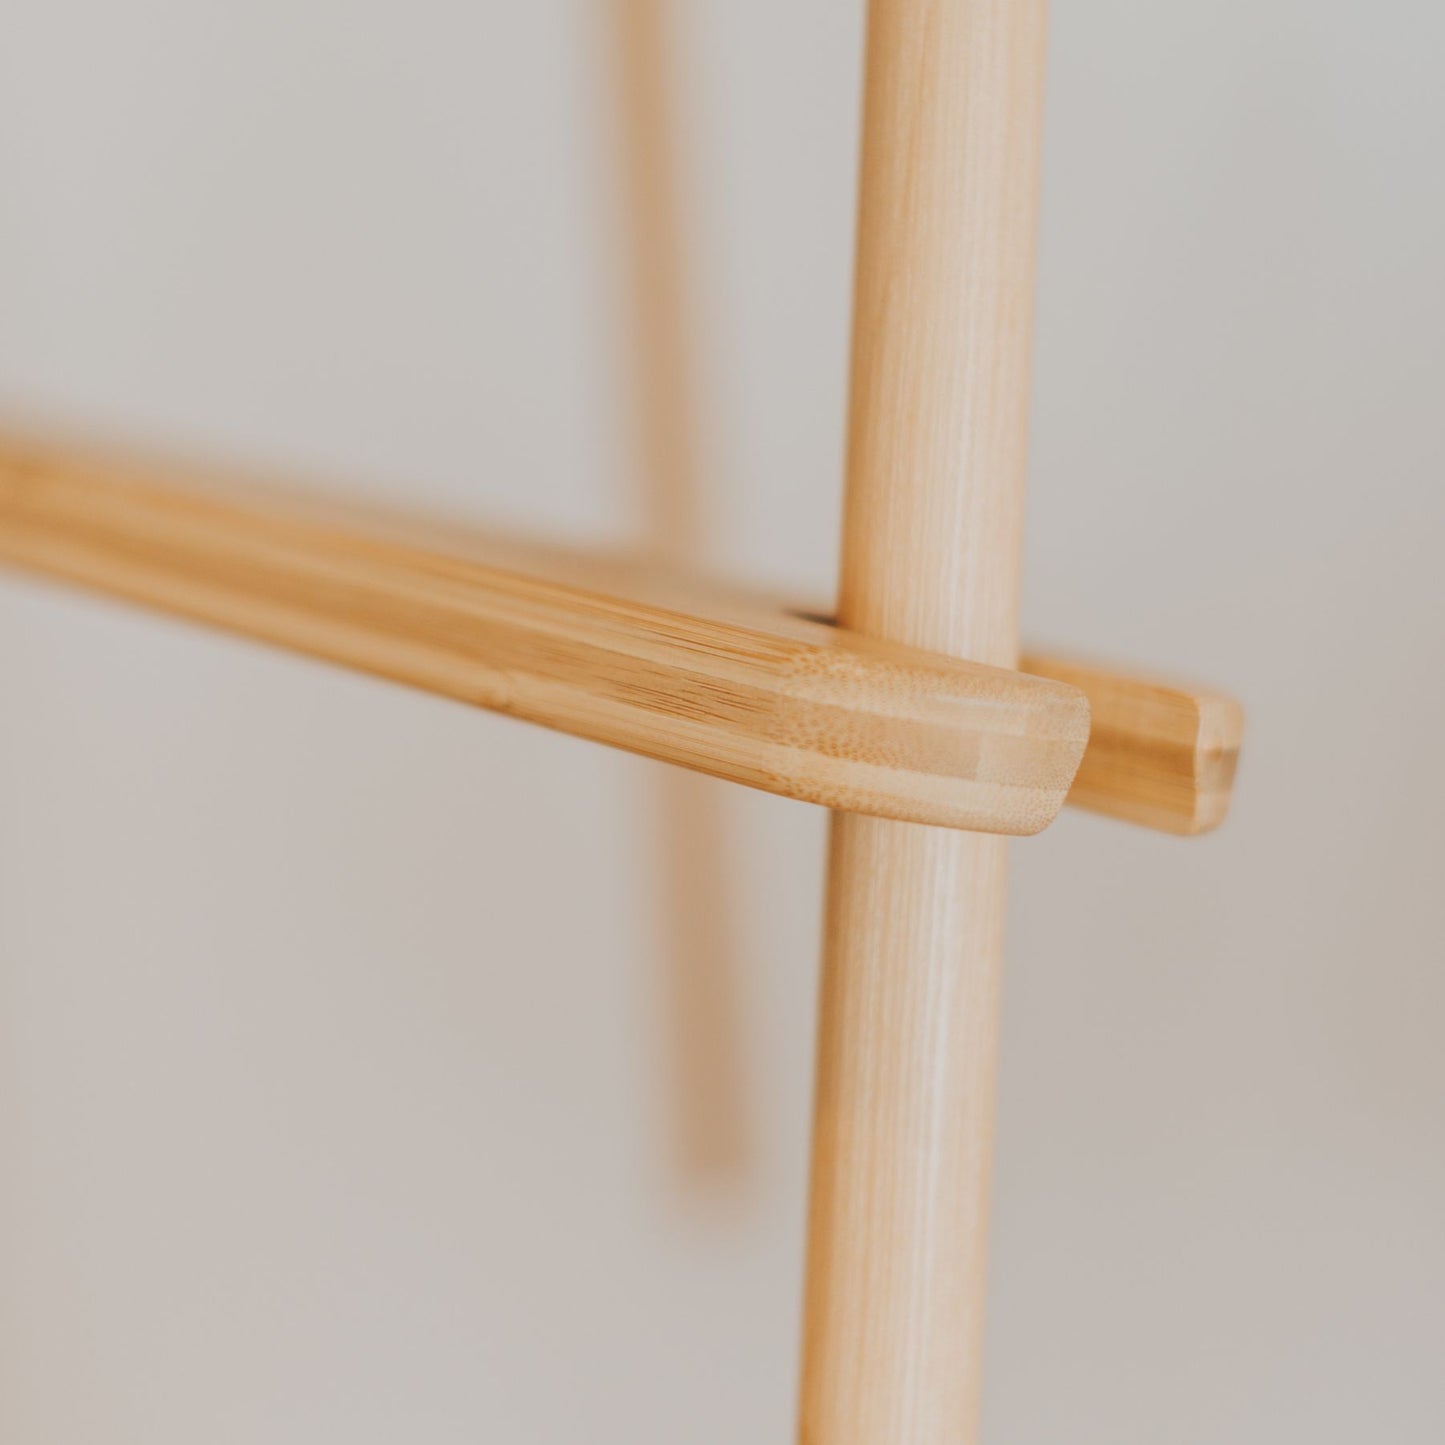 IKEA highchair footrest in bamboo timber